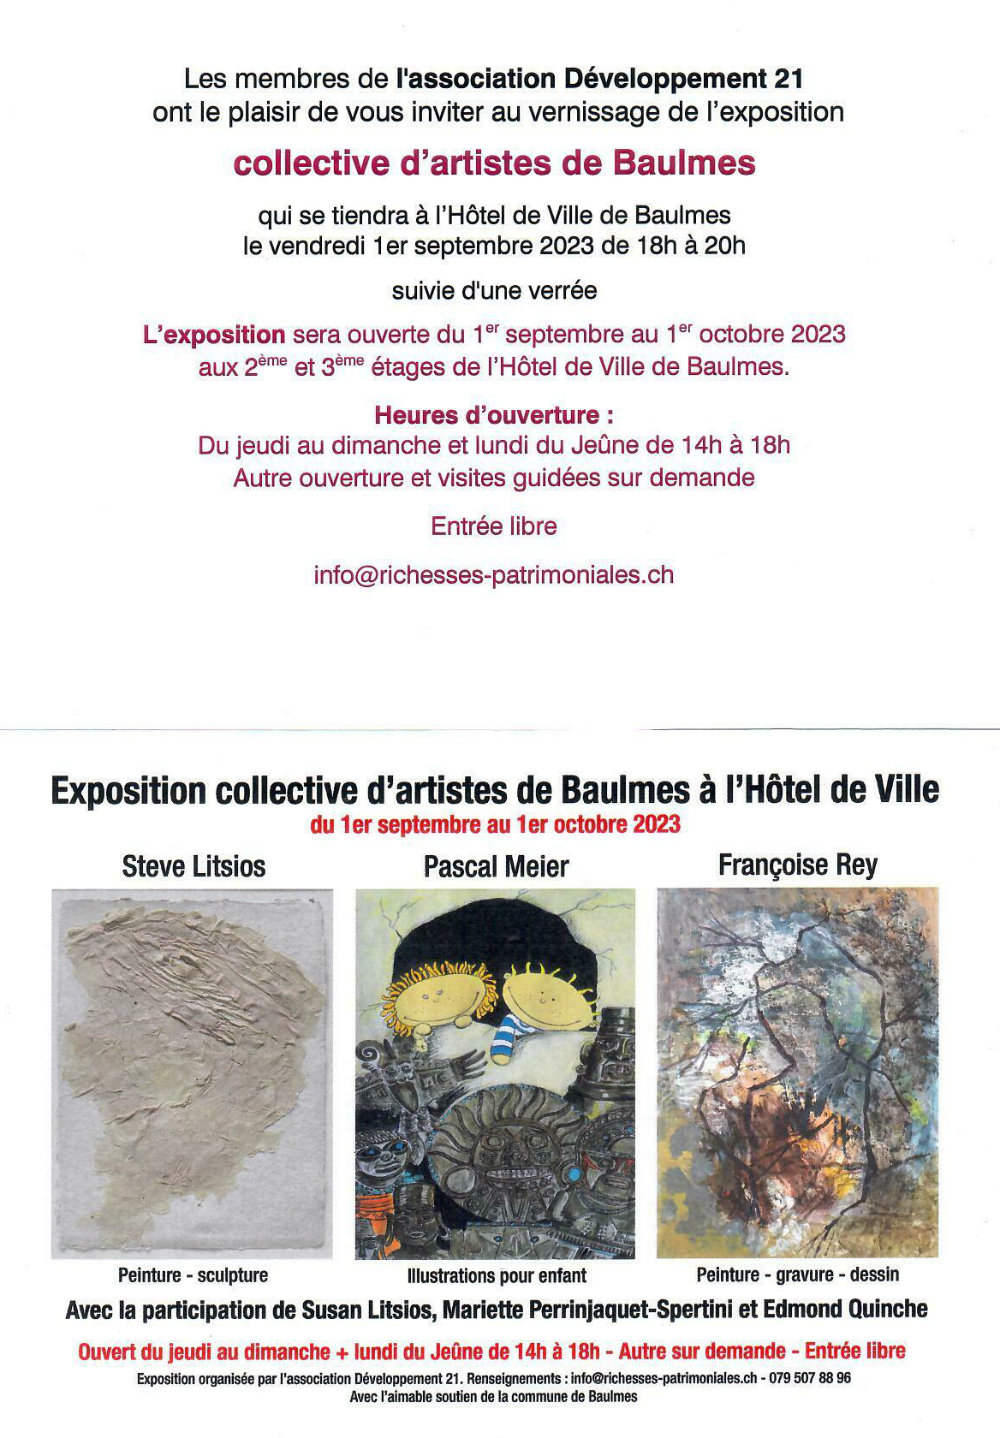 Invitation for a show with artists from Baulmes at the city hall (Hôtel de Ville), Sep. 1st to Oct. 1st 2023.